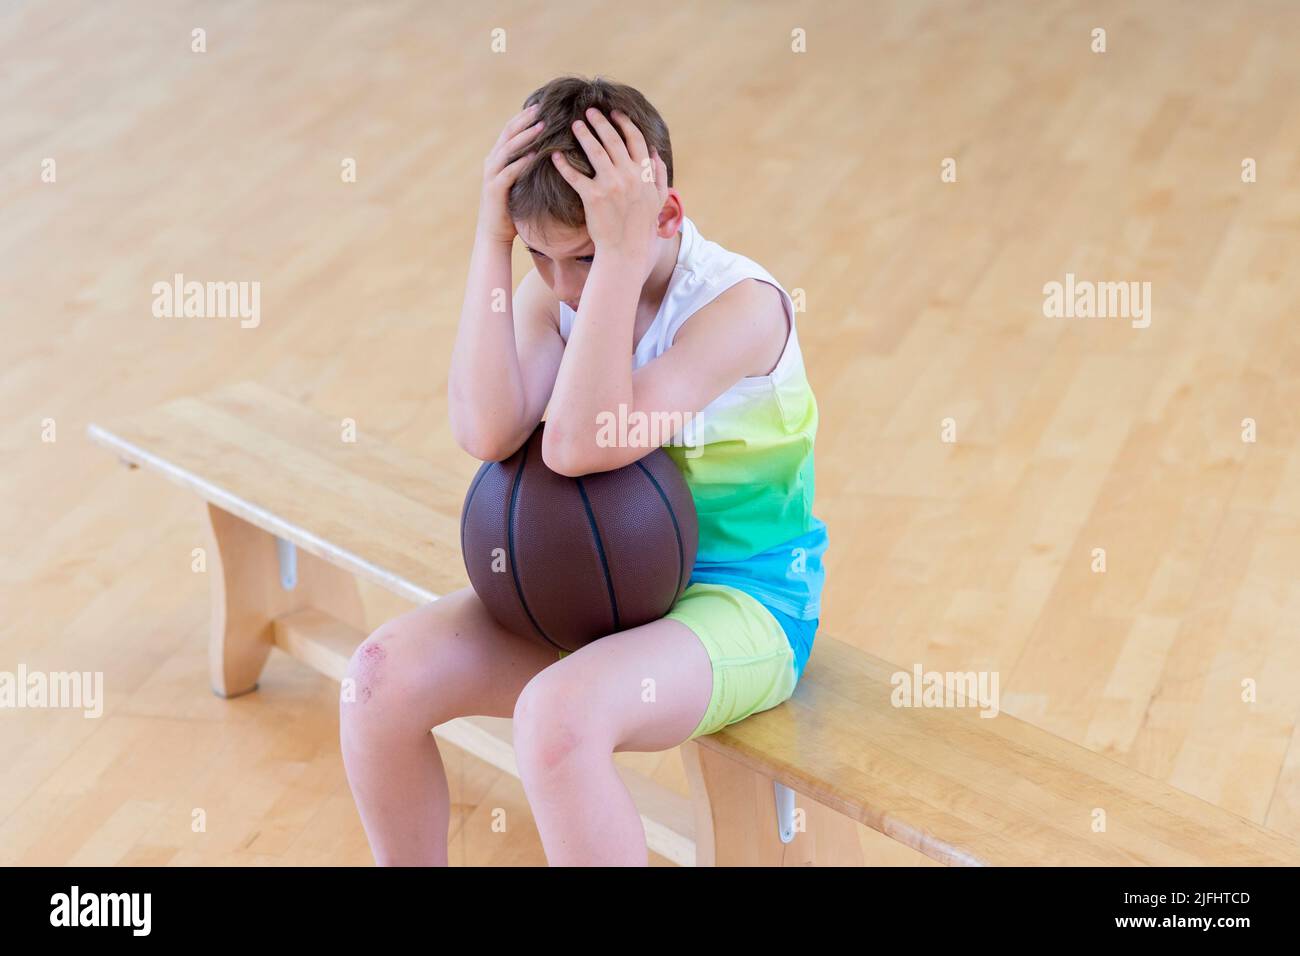 Sad disappointed boy with basketball ball in a physical education lesson Stock Photo